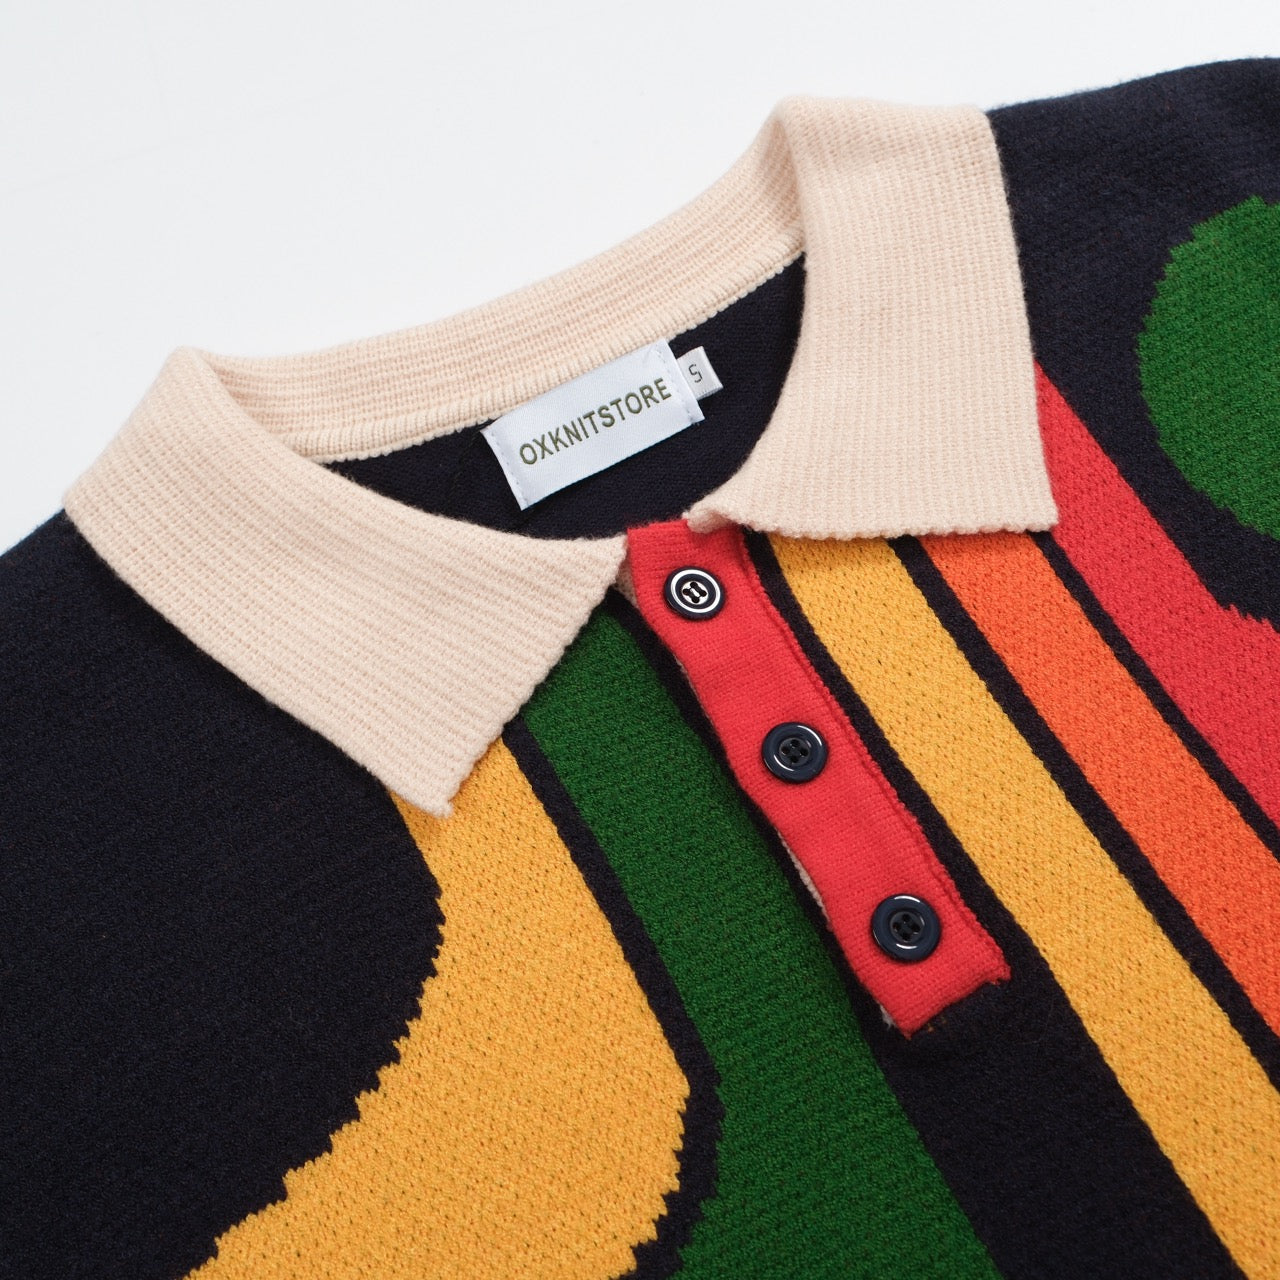 Men's vintage graphic knitted polo shirt